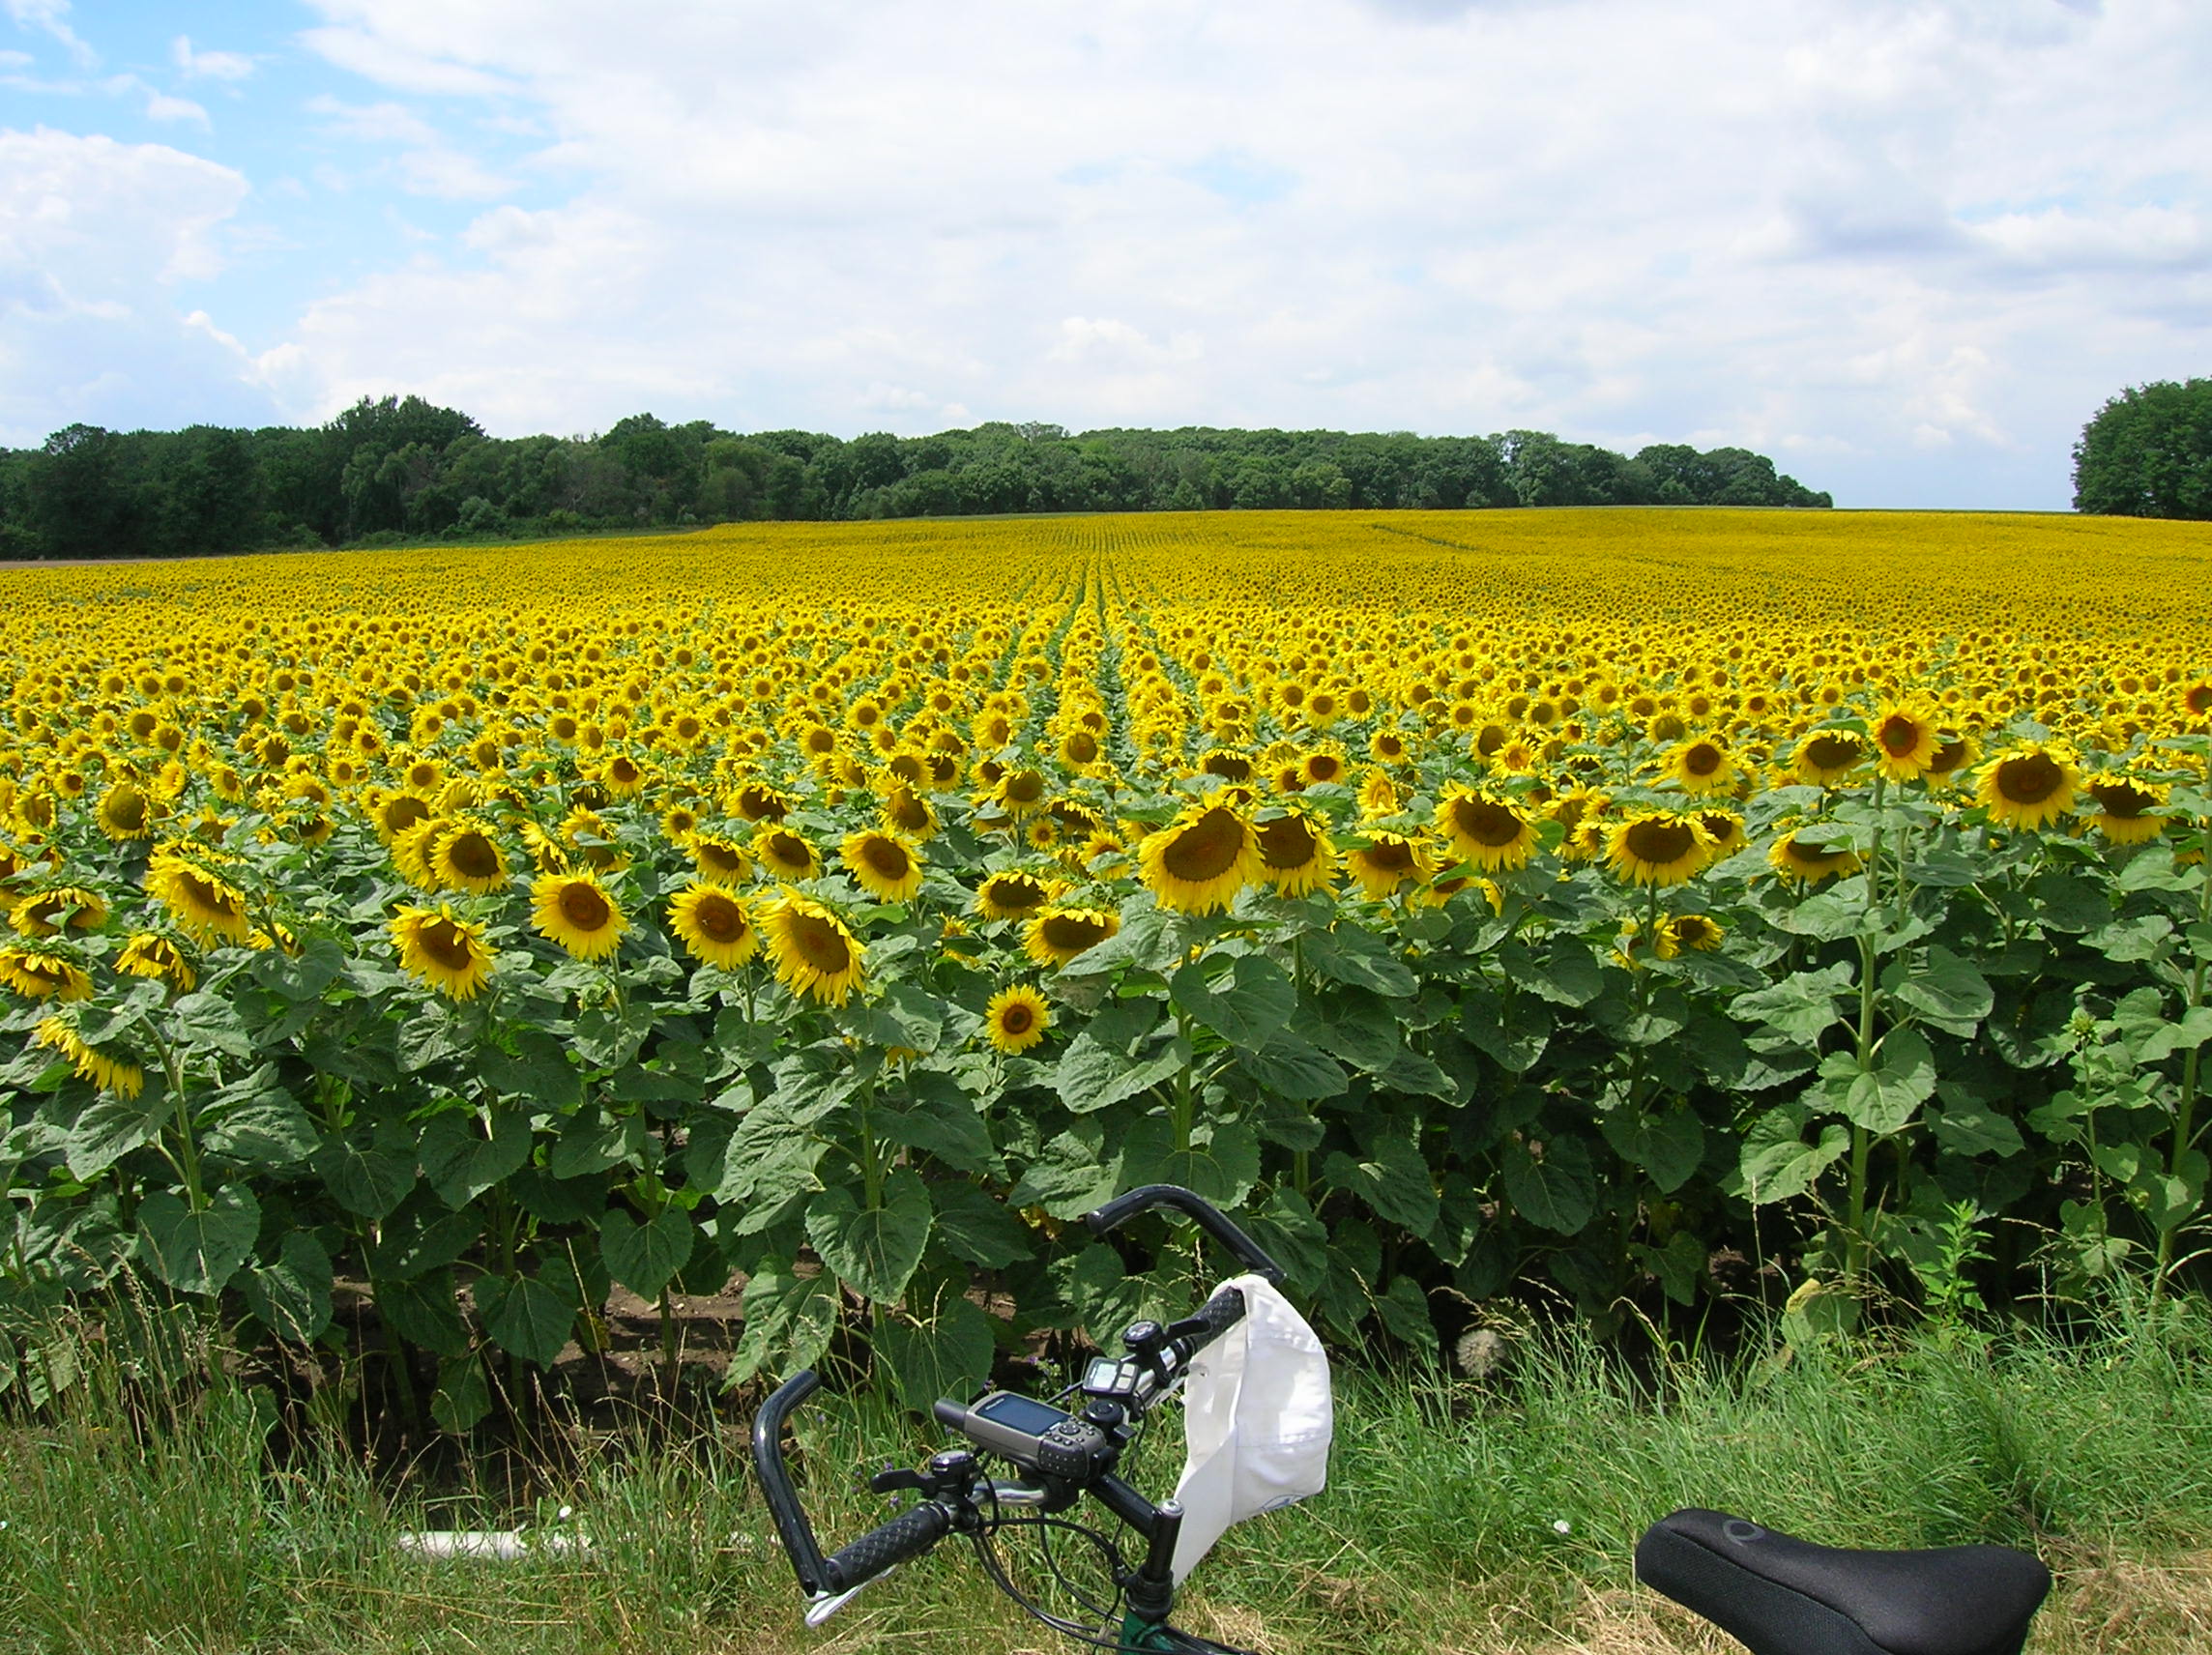 A photo of a large field of sunflowers with a bike parked in front of them